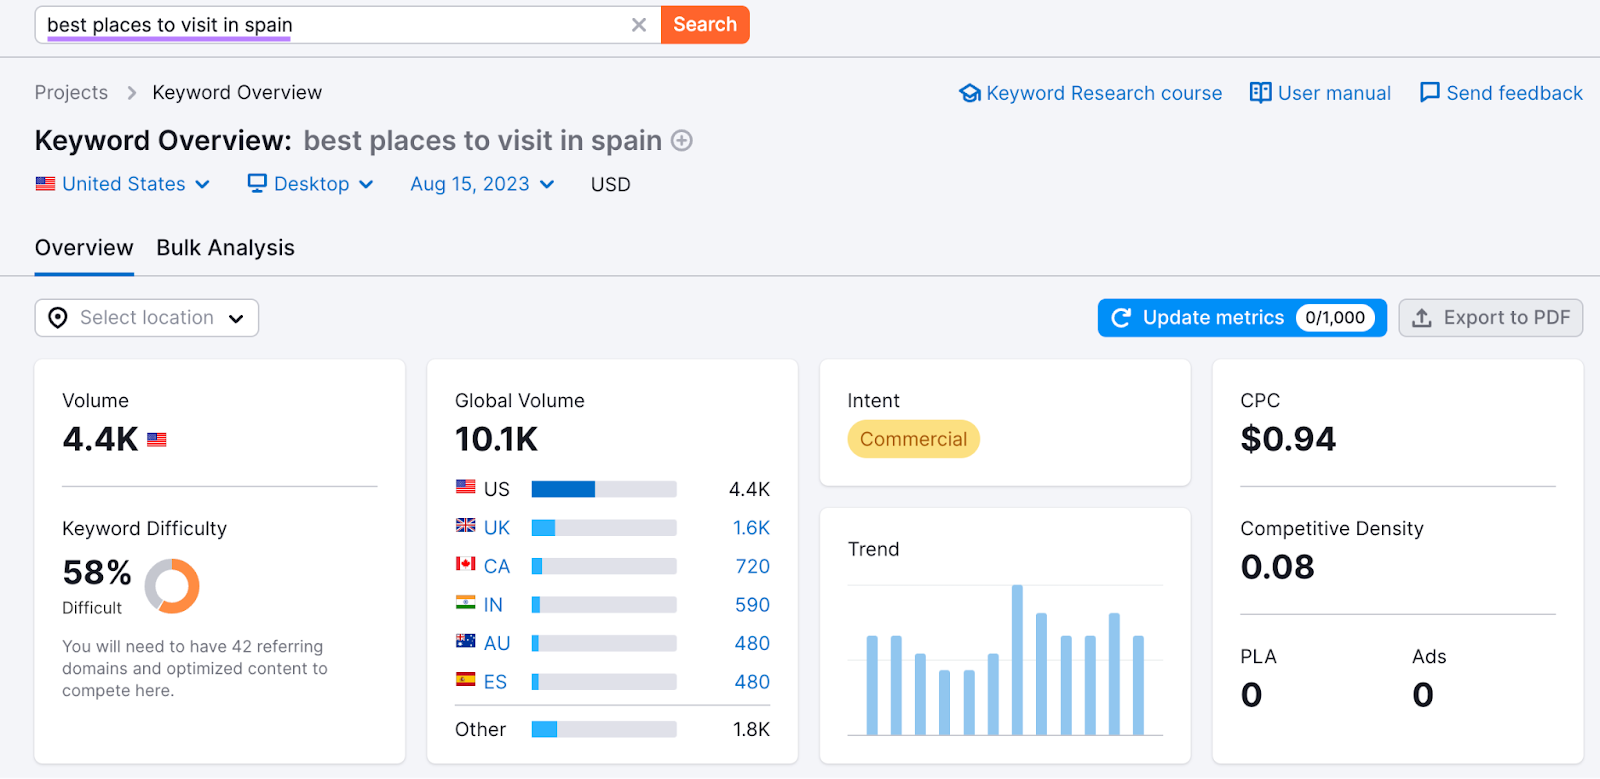 Keyword Overview dashboard for “best places to visit in spain"